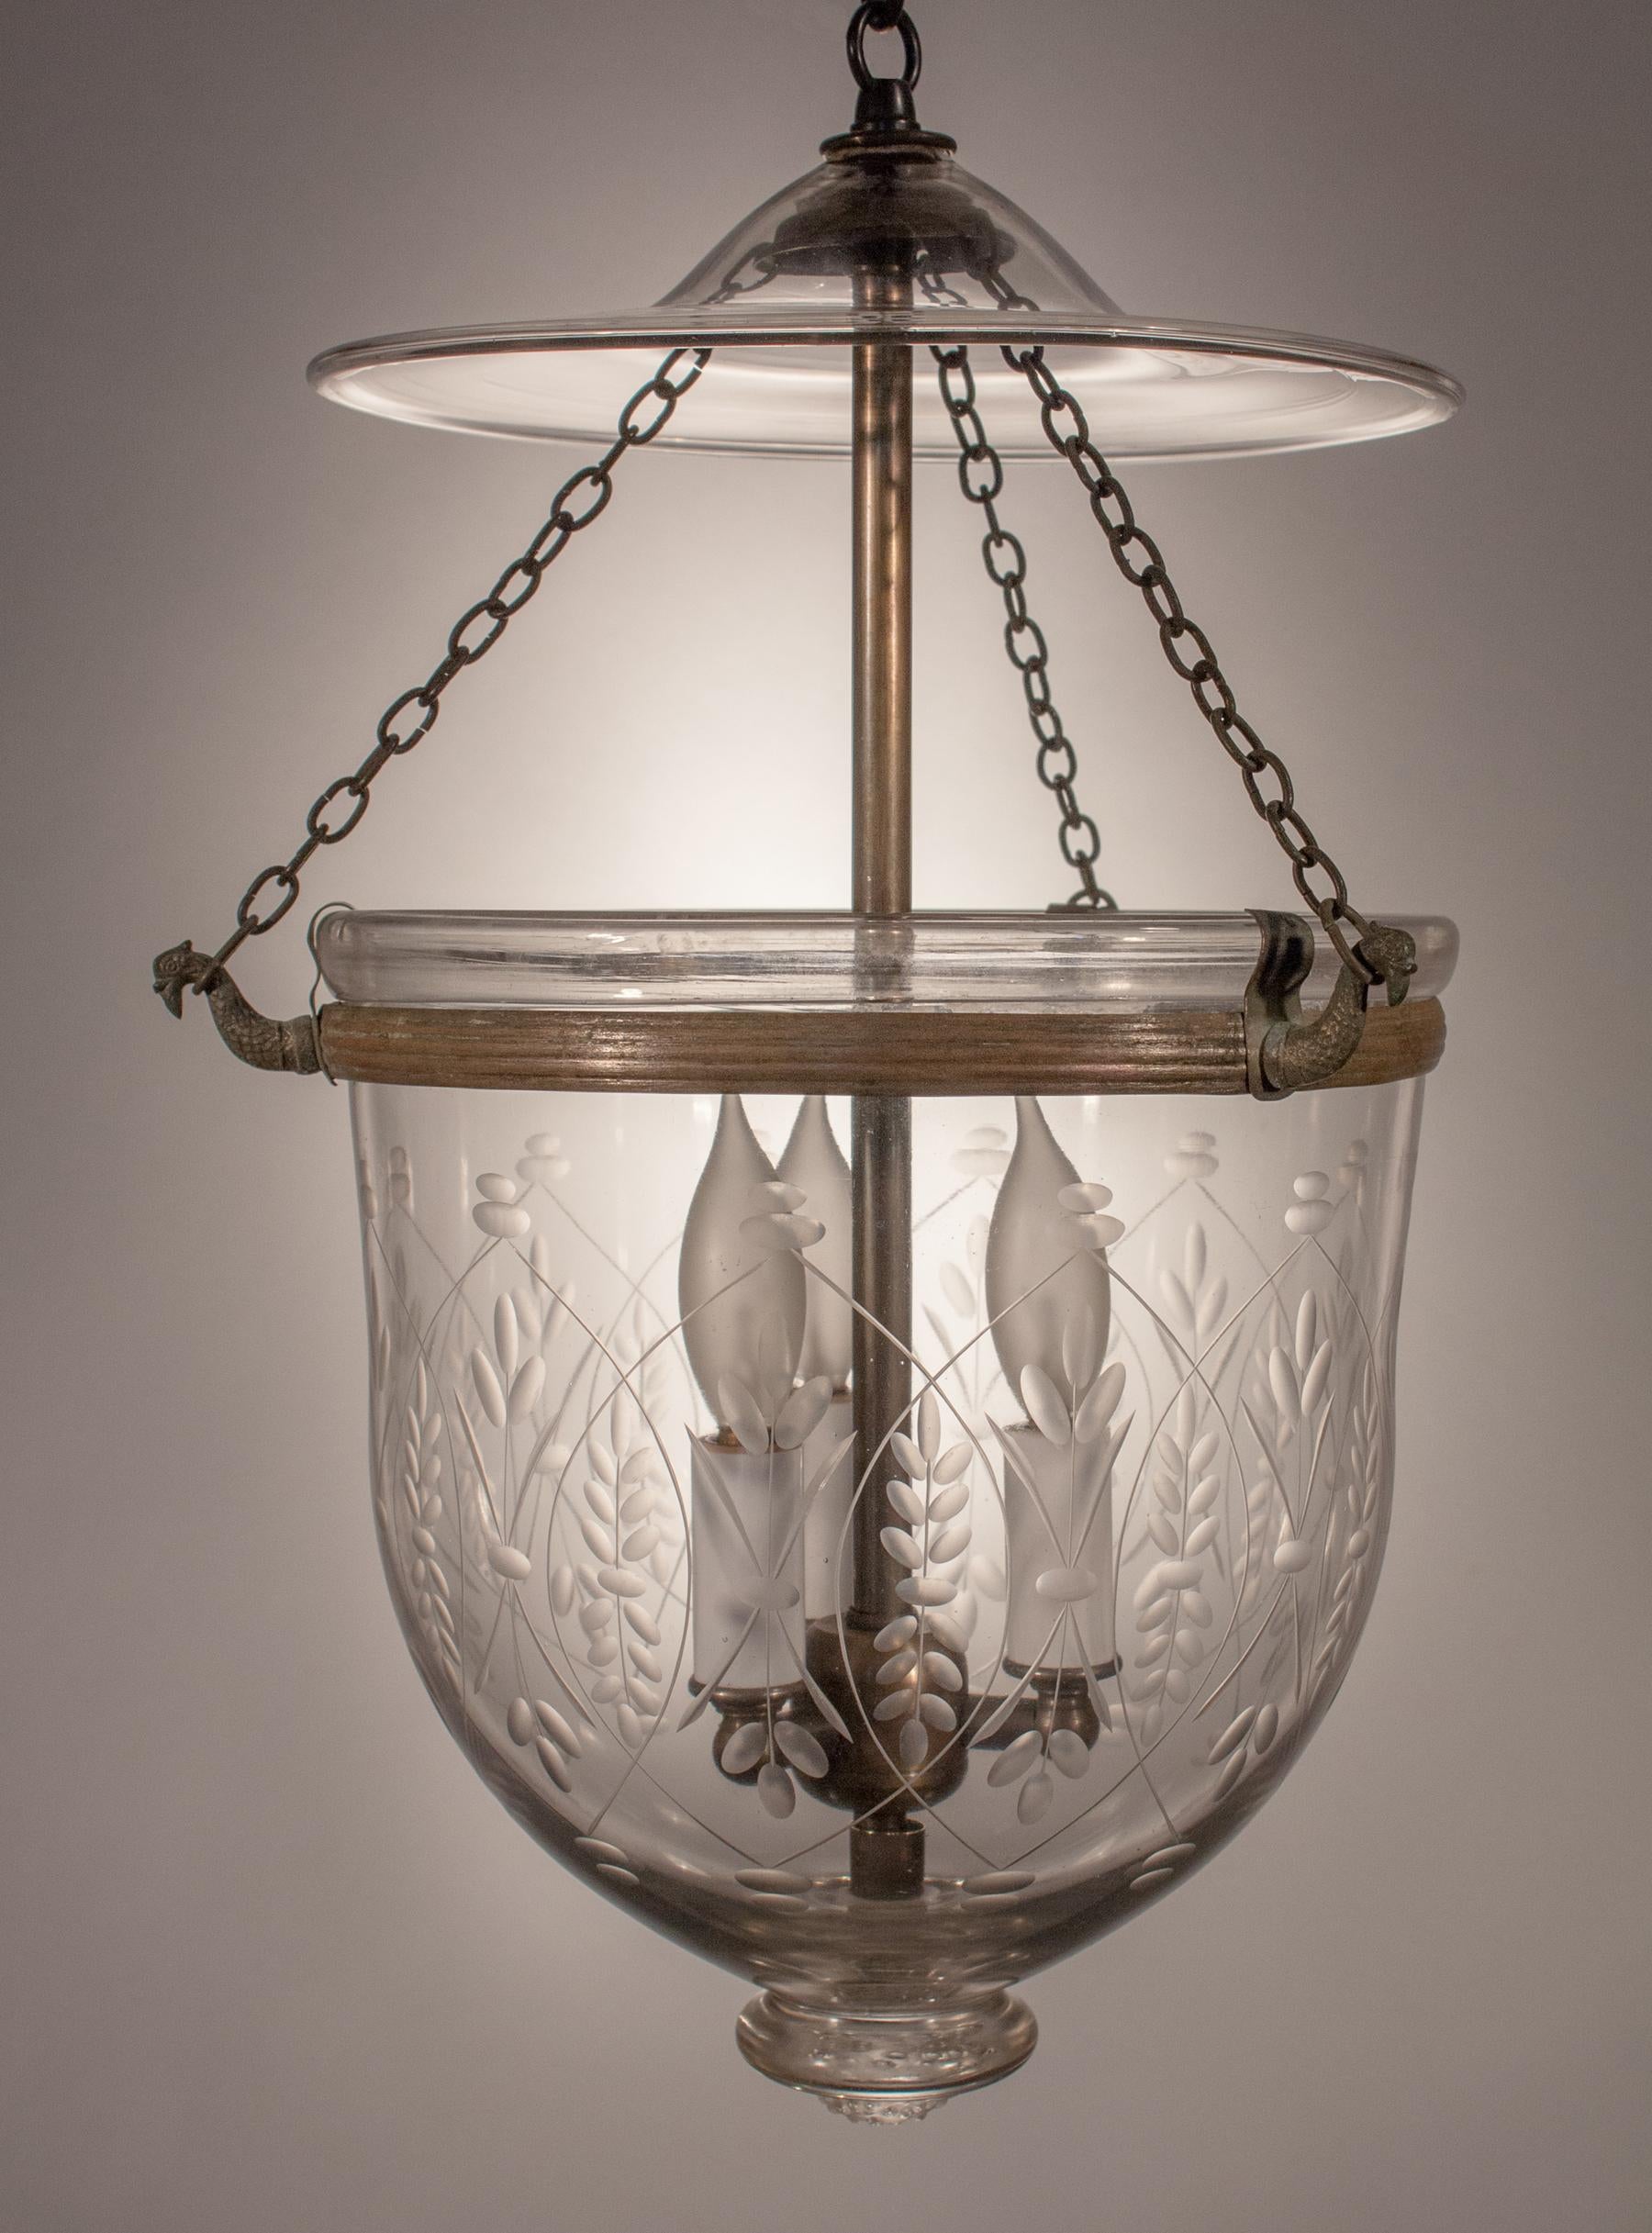 This handblown bell jar lantern boasts fullness and nice proportion for its 9-inch diameter size. The lantern has an original rolled brass band and features a finely etched wheat pattern that complements the contours of the bell jar. The pendant